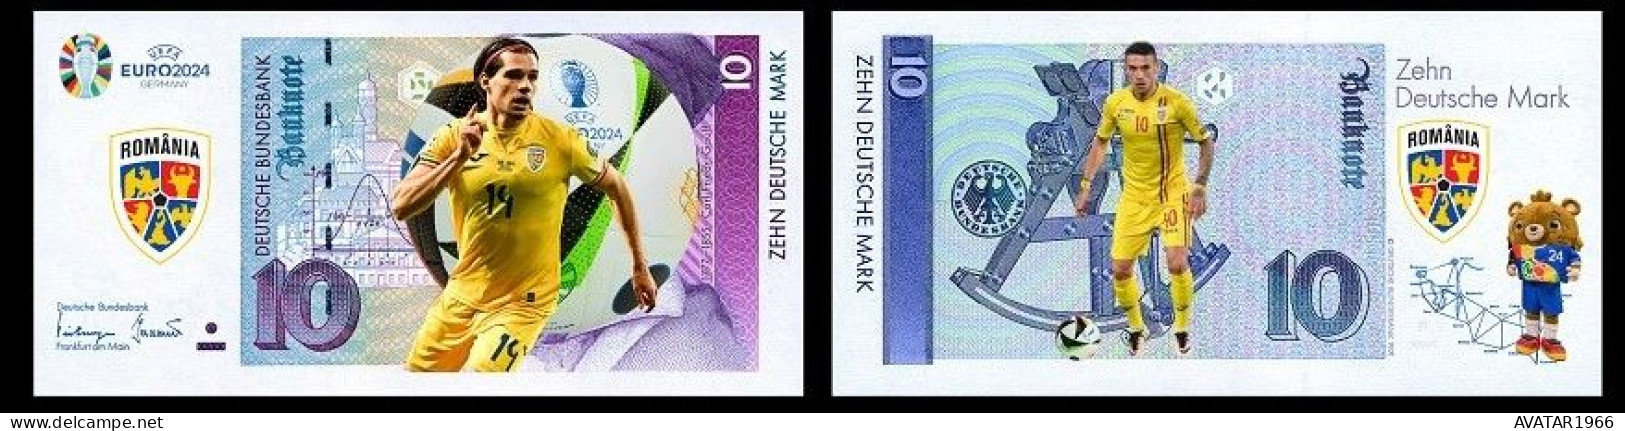 UEFA European Football Championship 2024 Qualified Country Romania 8 Pieces Germany Fantasy Paper Money - [15] Commemoratives & Special Issues